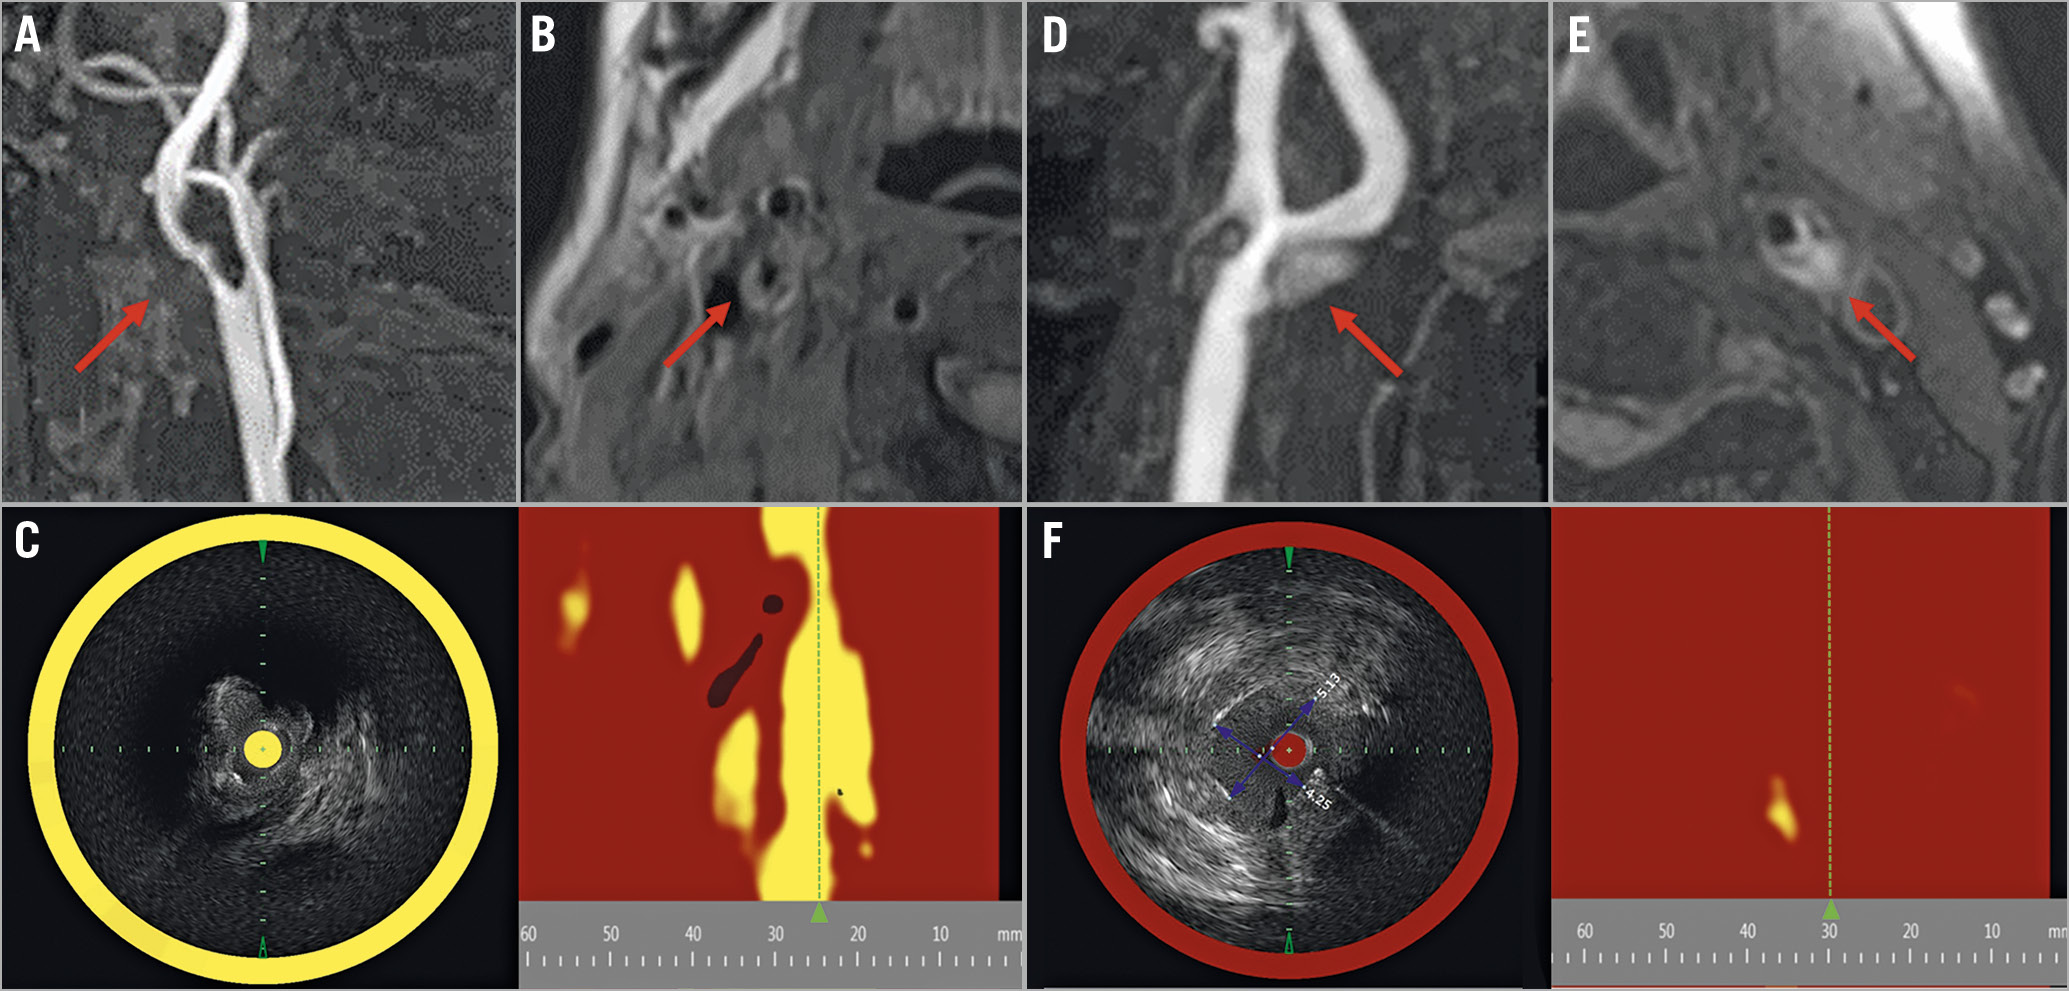 Figure 1. Findings from NIRS-IVUS and MRI of carotid plaques. A) Right symptomatic carotid stenosis in a 79-year-old man on TOF image (arrow). B) Plaque has slightly higher intensity on the T1-weighted image (arrow). C) NIRS-IVUS has a very high LCBI (961) at the MLA segment. This patient presented with embolic stroke and stent occlusion after CAS. D) Left asymptomatic carotid stenosis in a 72-year-old man on TOF image (arrow). E) Plaque manifests as higher intensity than adjacent muscle on the T1-weighted image (arrow). F) NIRS-IVUS reveals very low LCBI (111) at the MLA segment. Embolic events did not occur after CAS in this patient. CAS: carotid artery stenting; IVUS: intravascular ultrasound; LCBI: lipid core burden index; MLA: minimal lumen area; MRA: magnetic resonance angiography; MRI: magnetic resonance imaging; NIRS: near-infrared spectroscopy; TOF: time-of-flight